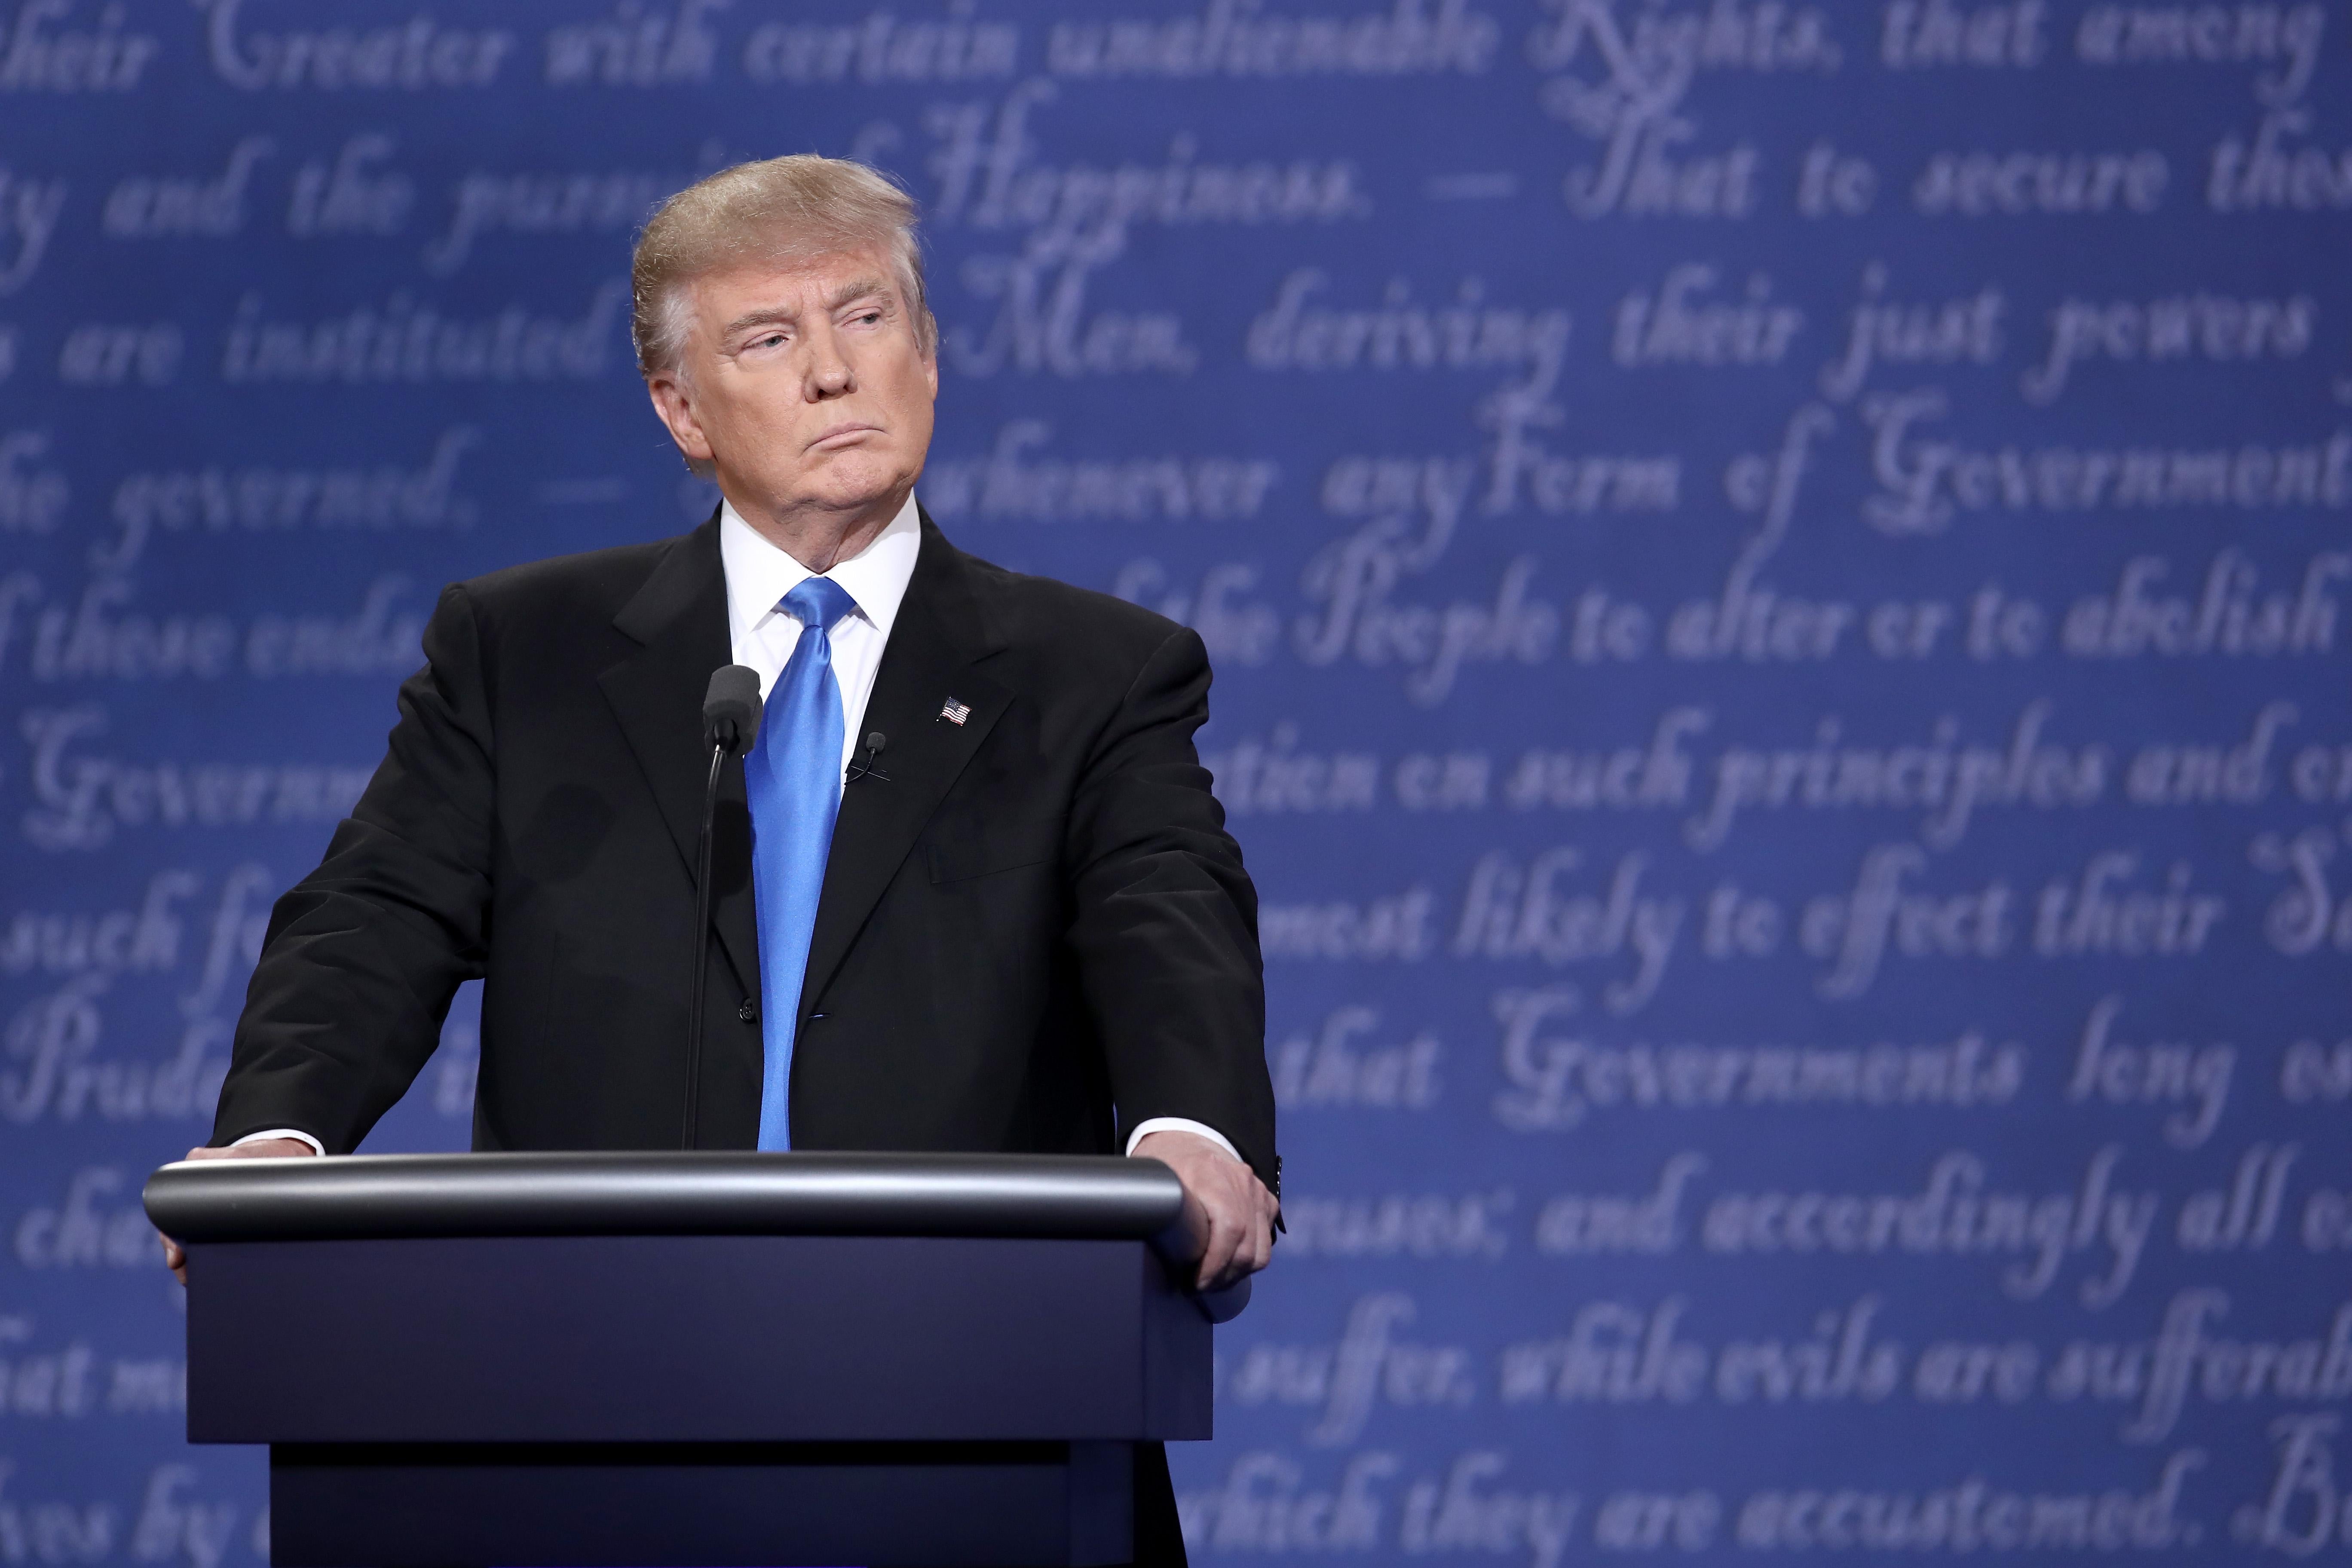 Donald Trump at a debate with Hillary Clinton during the 2016 election